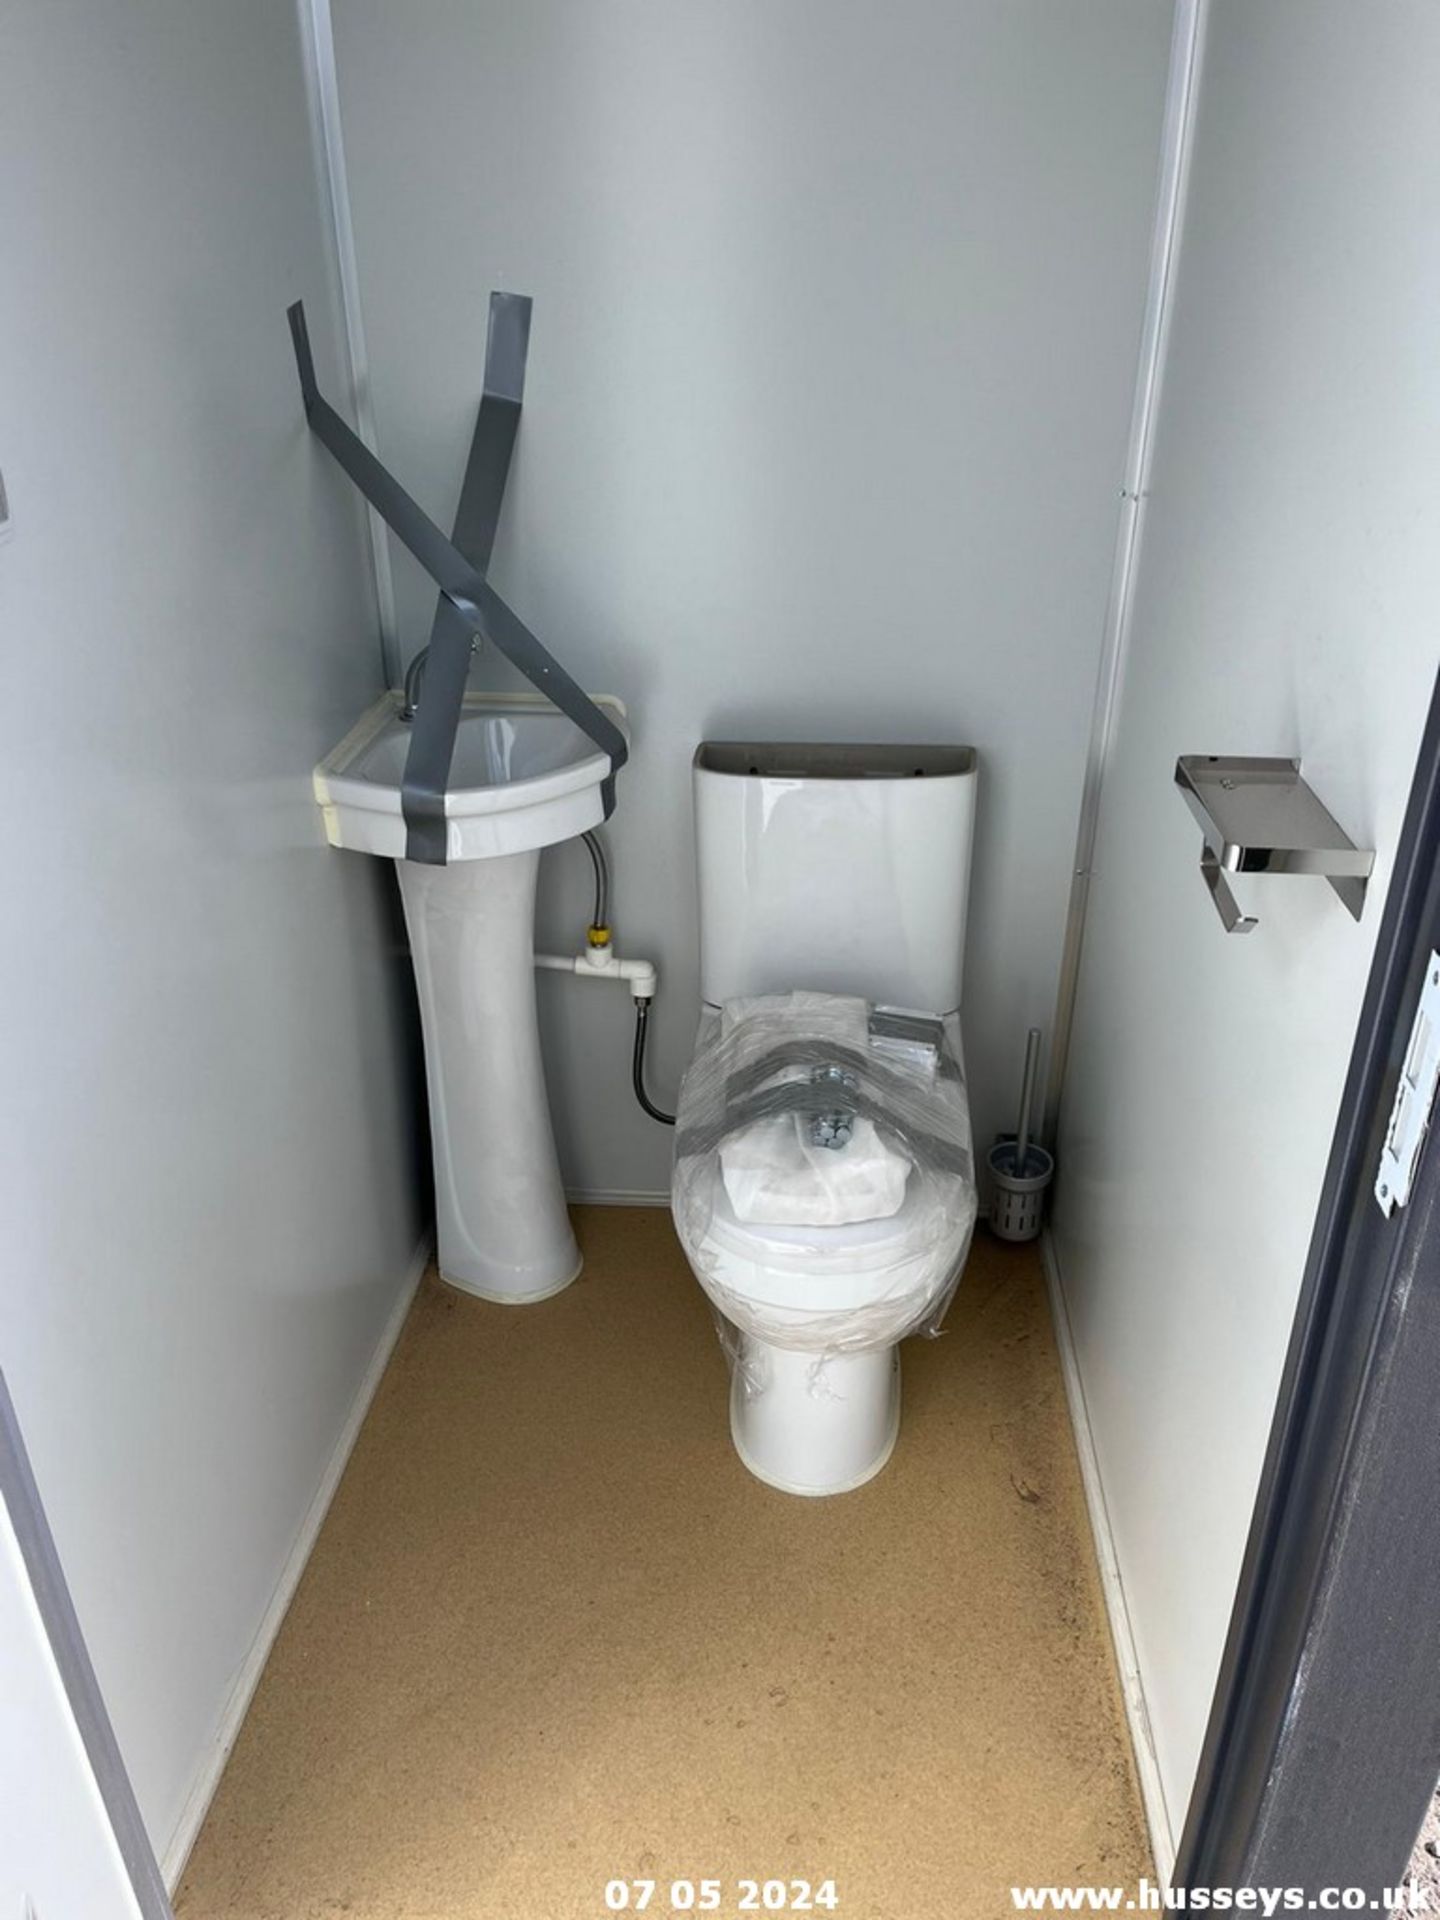 2 PERSON TOILET C.W 2 SINKS WCS LIGHTS & EXTRACTORS FORK POCKETS & LIFTING EYES C.W KEYS - Image 6 of 10